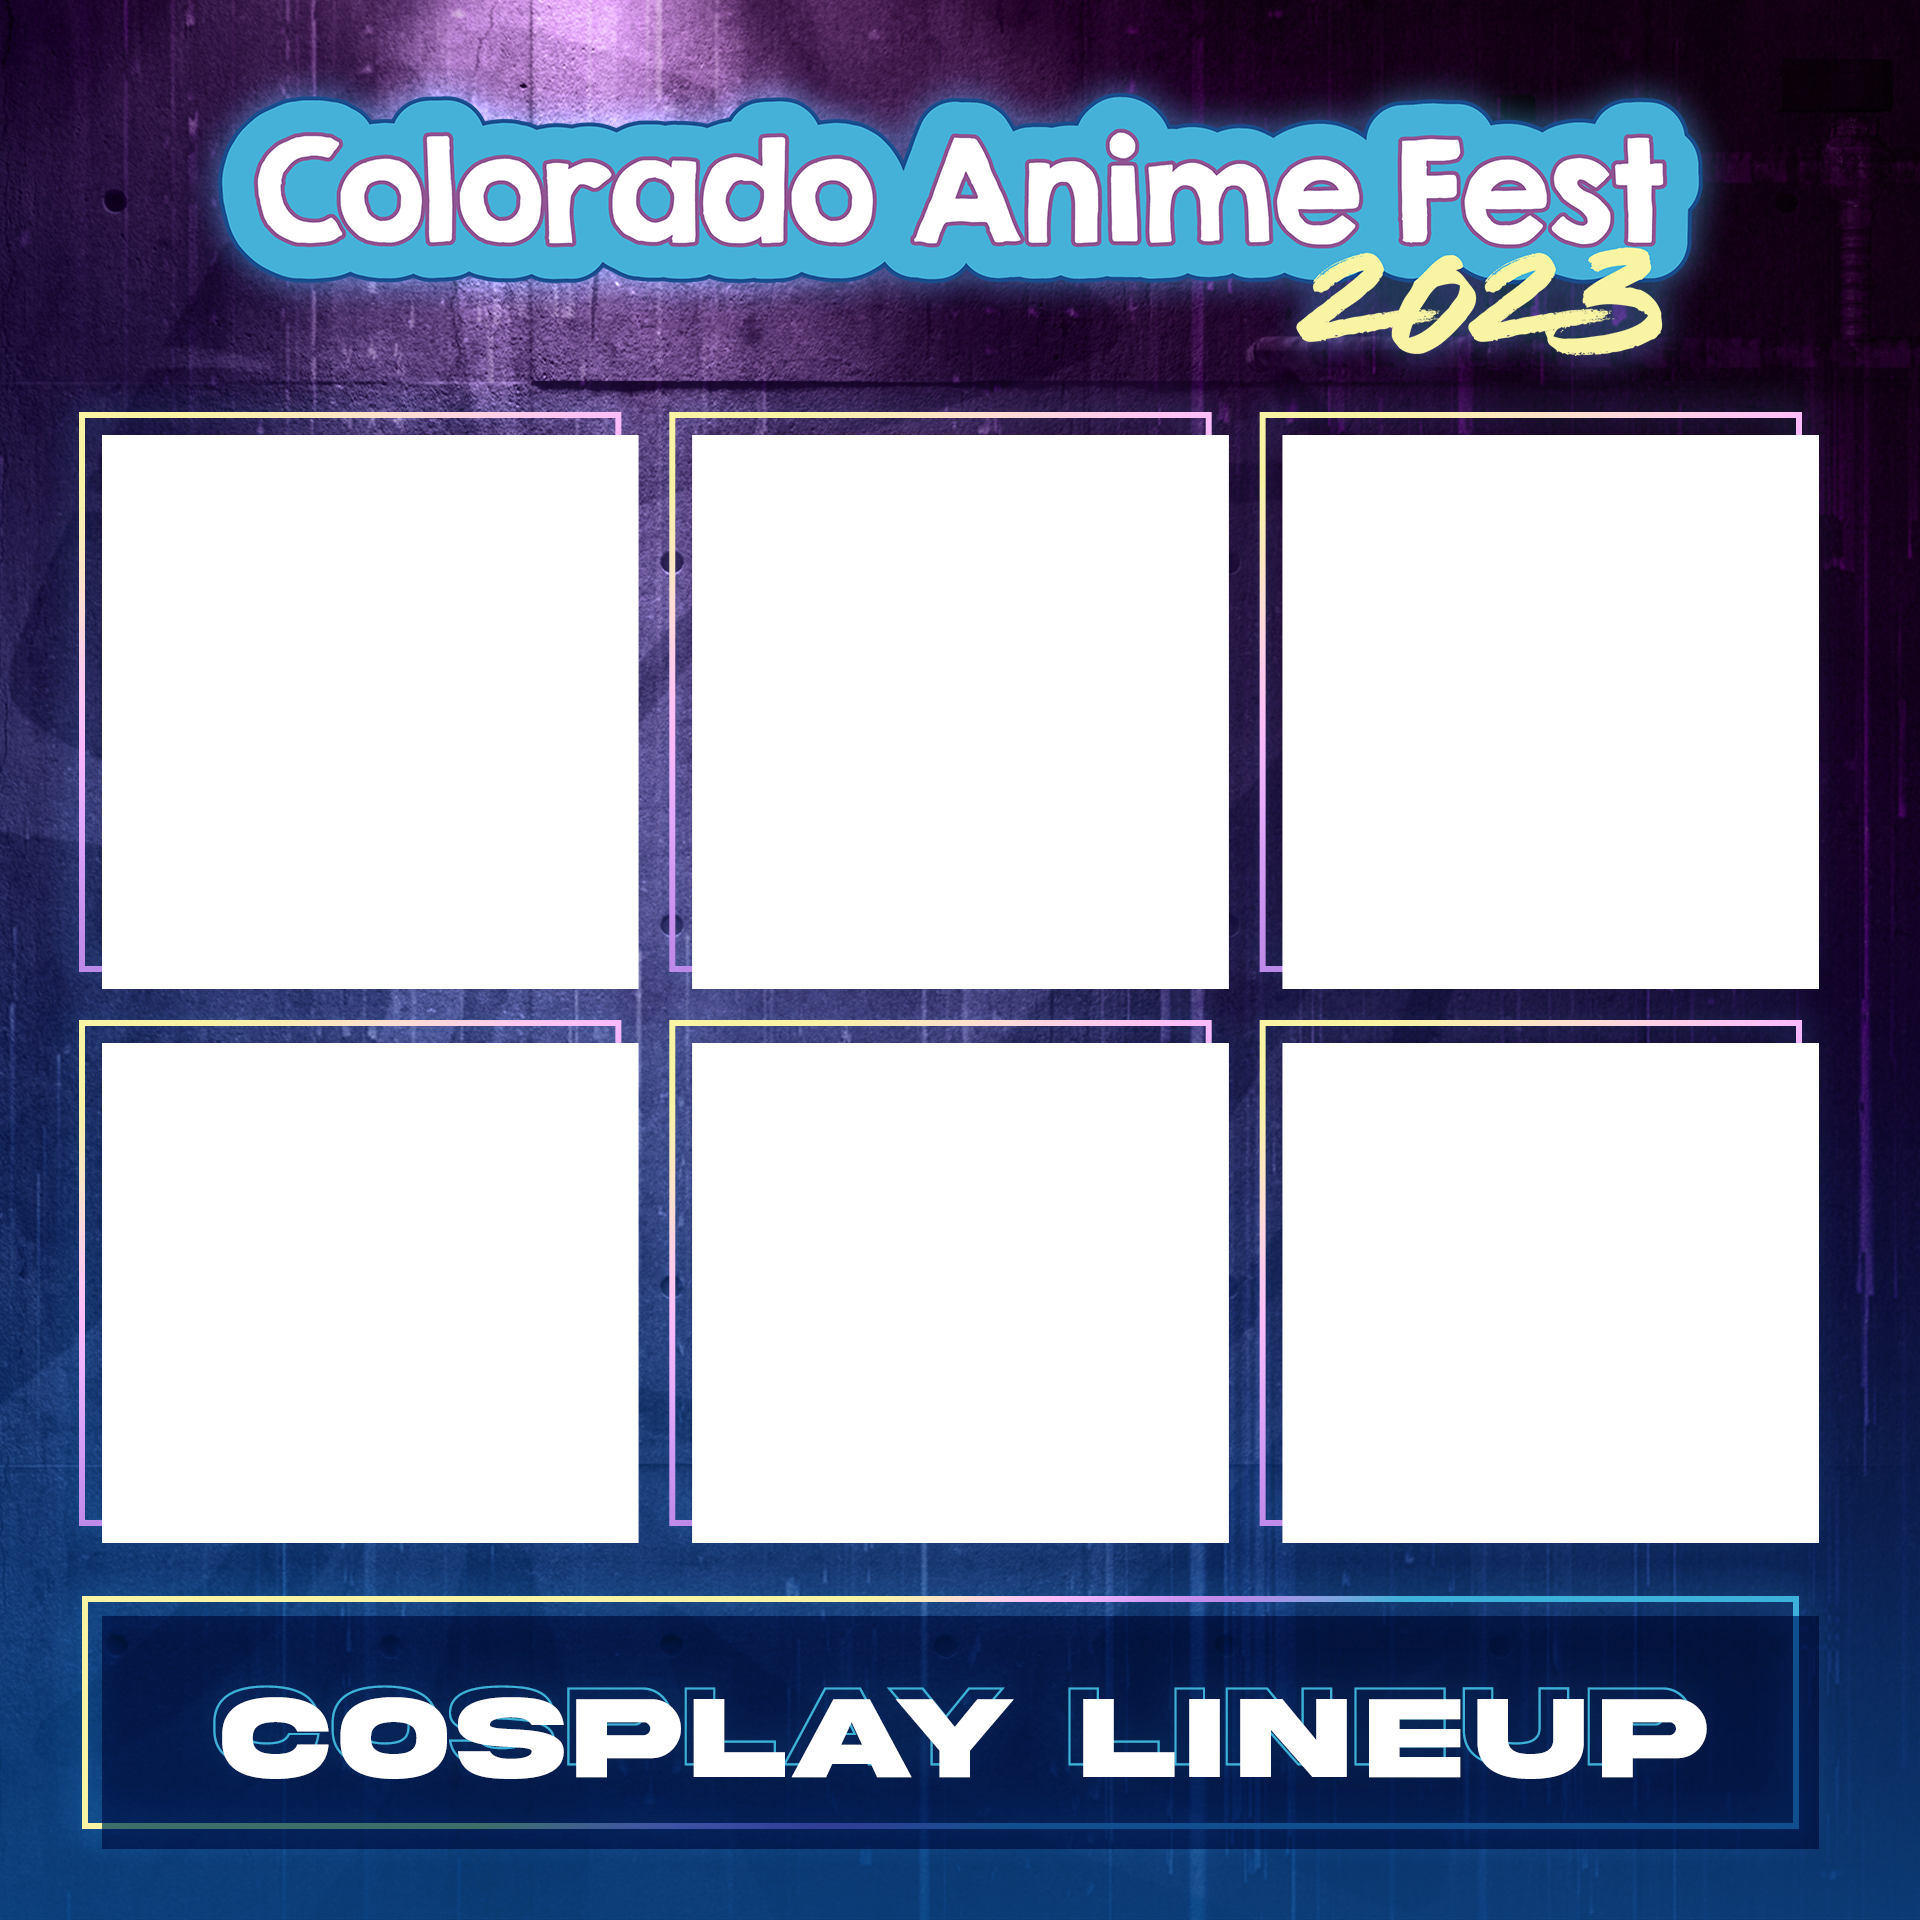 COAF_2023_Cosplay_Lineup_6BOX.png